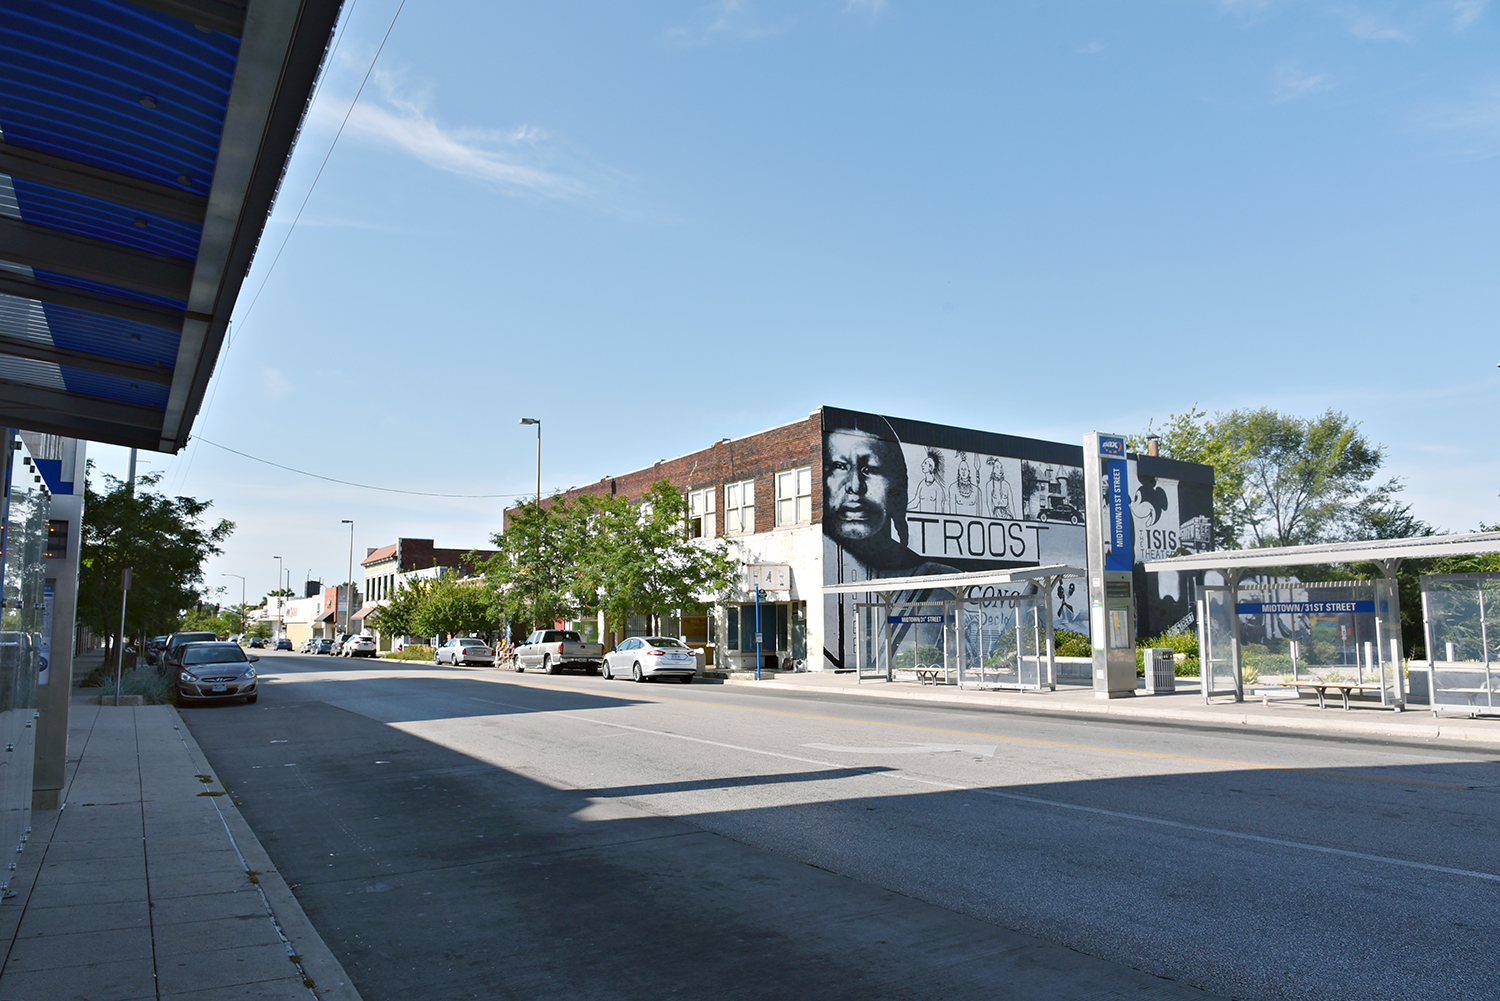 Defining “Good” Development at 31st and Troost